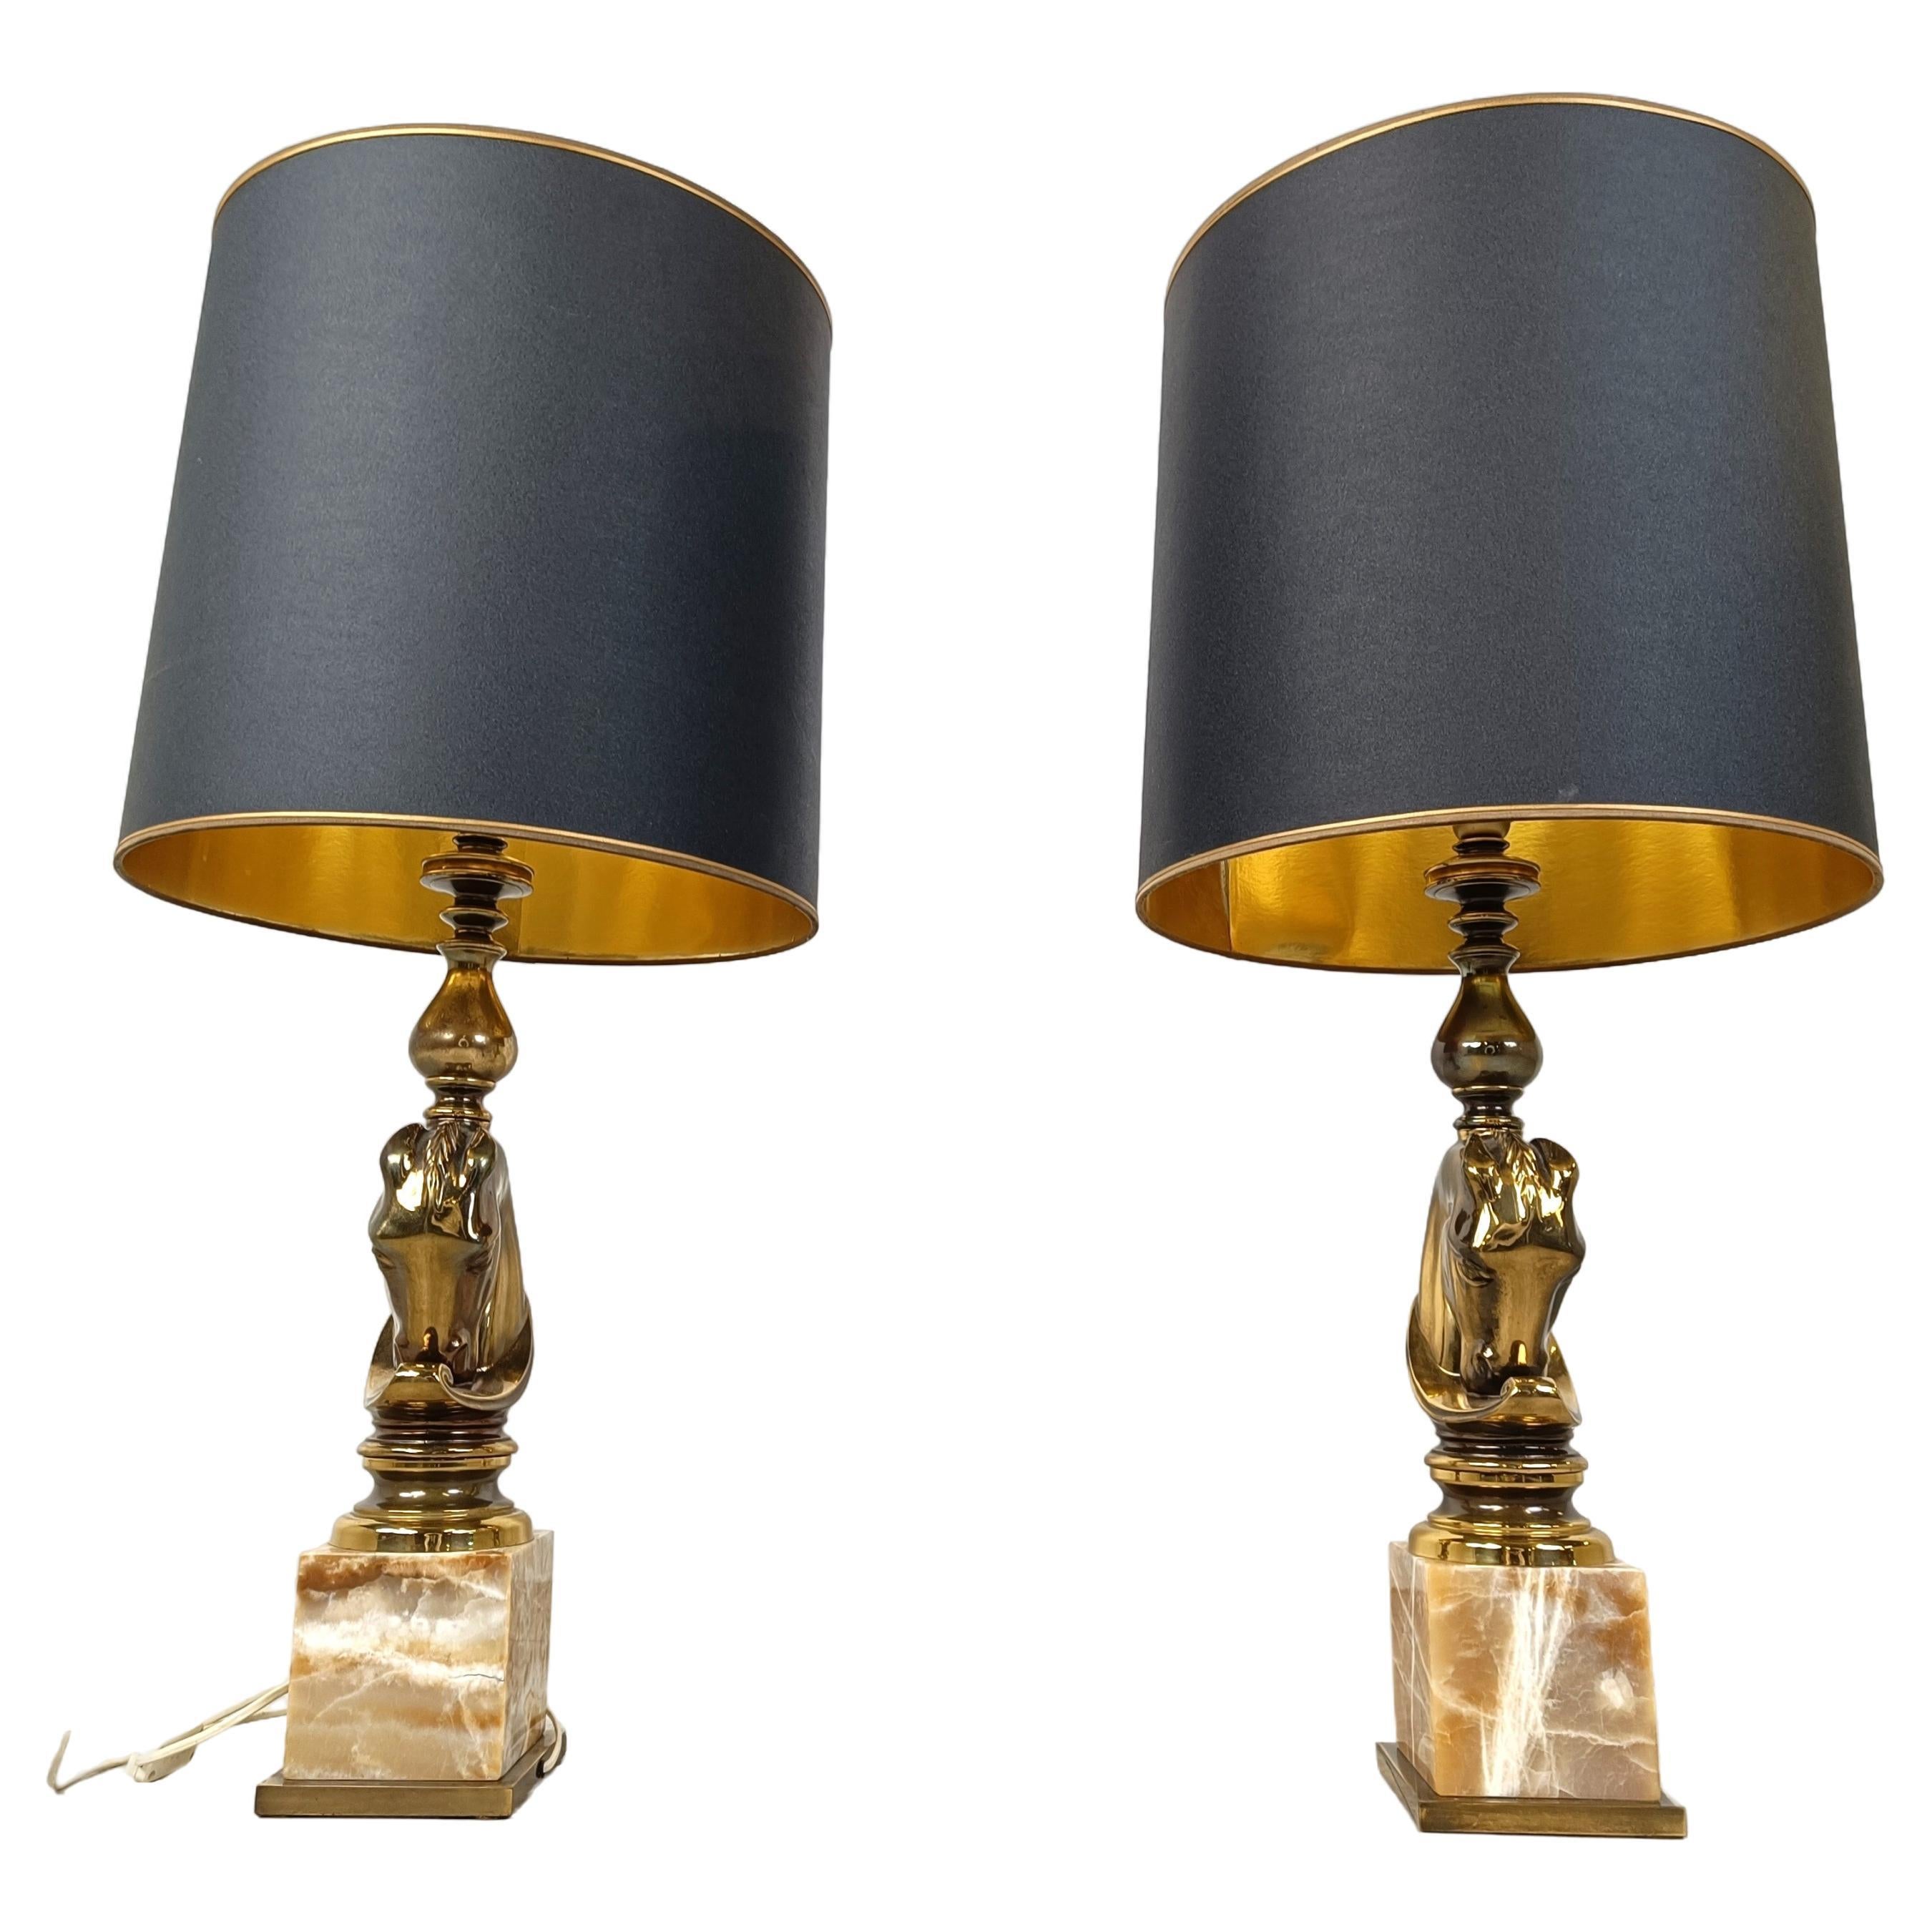 Pair of Brass Horse Head Table Lamps, 1970s Belgium For Sale